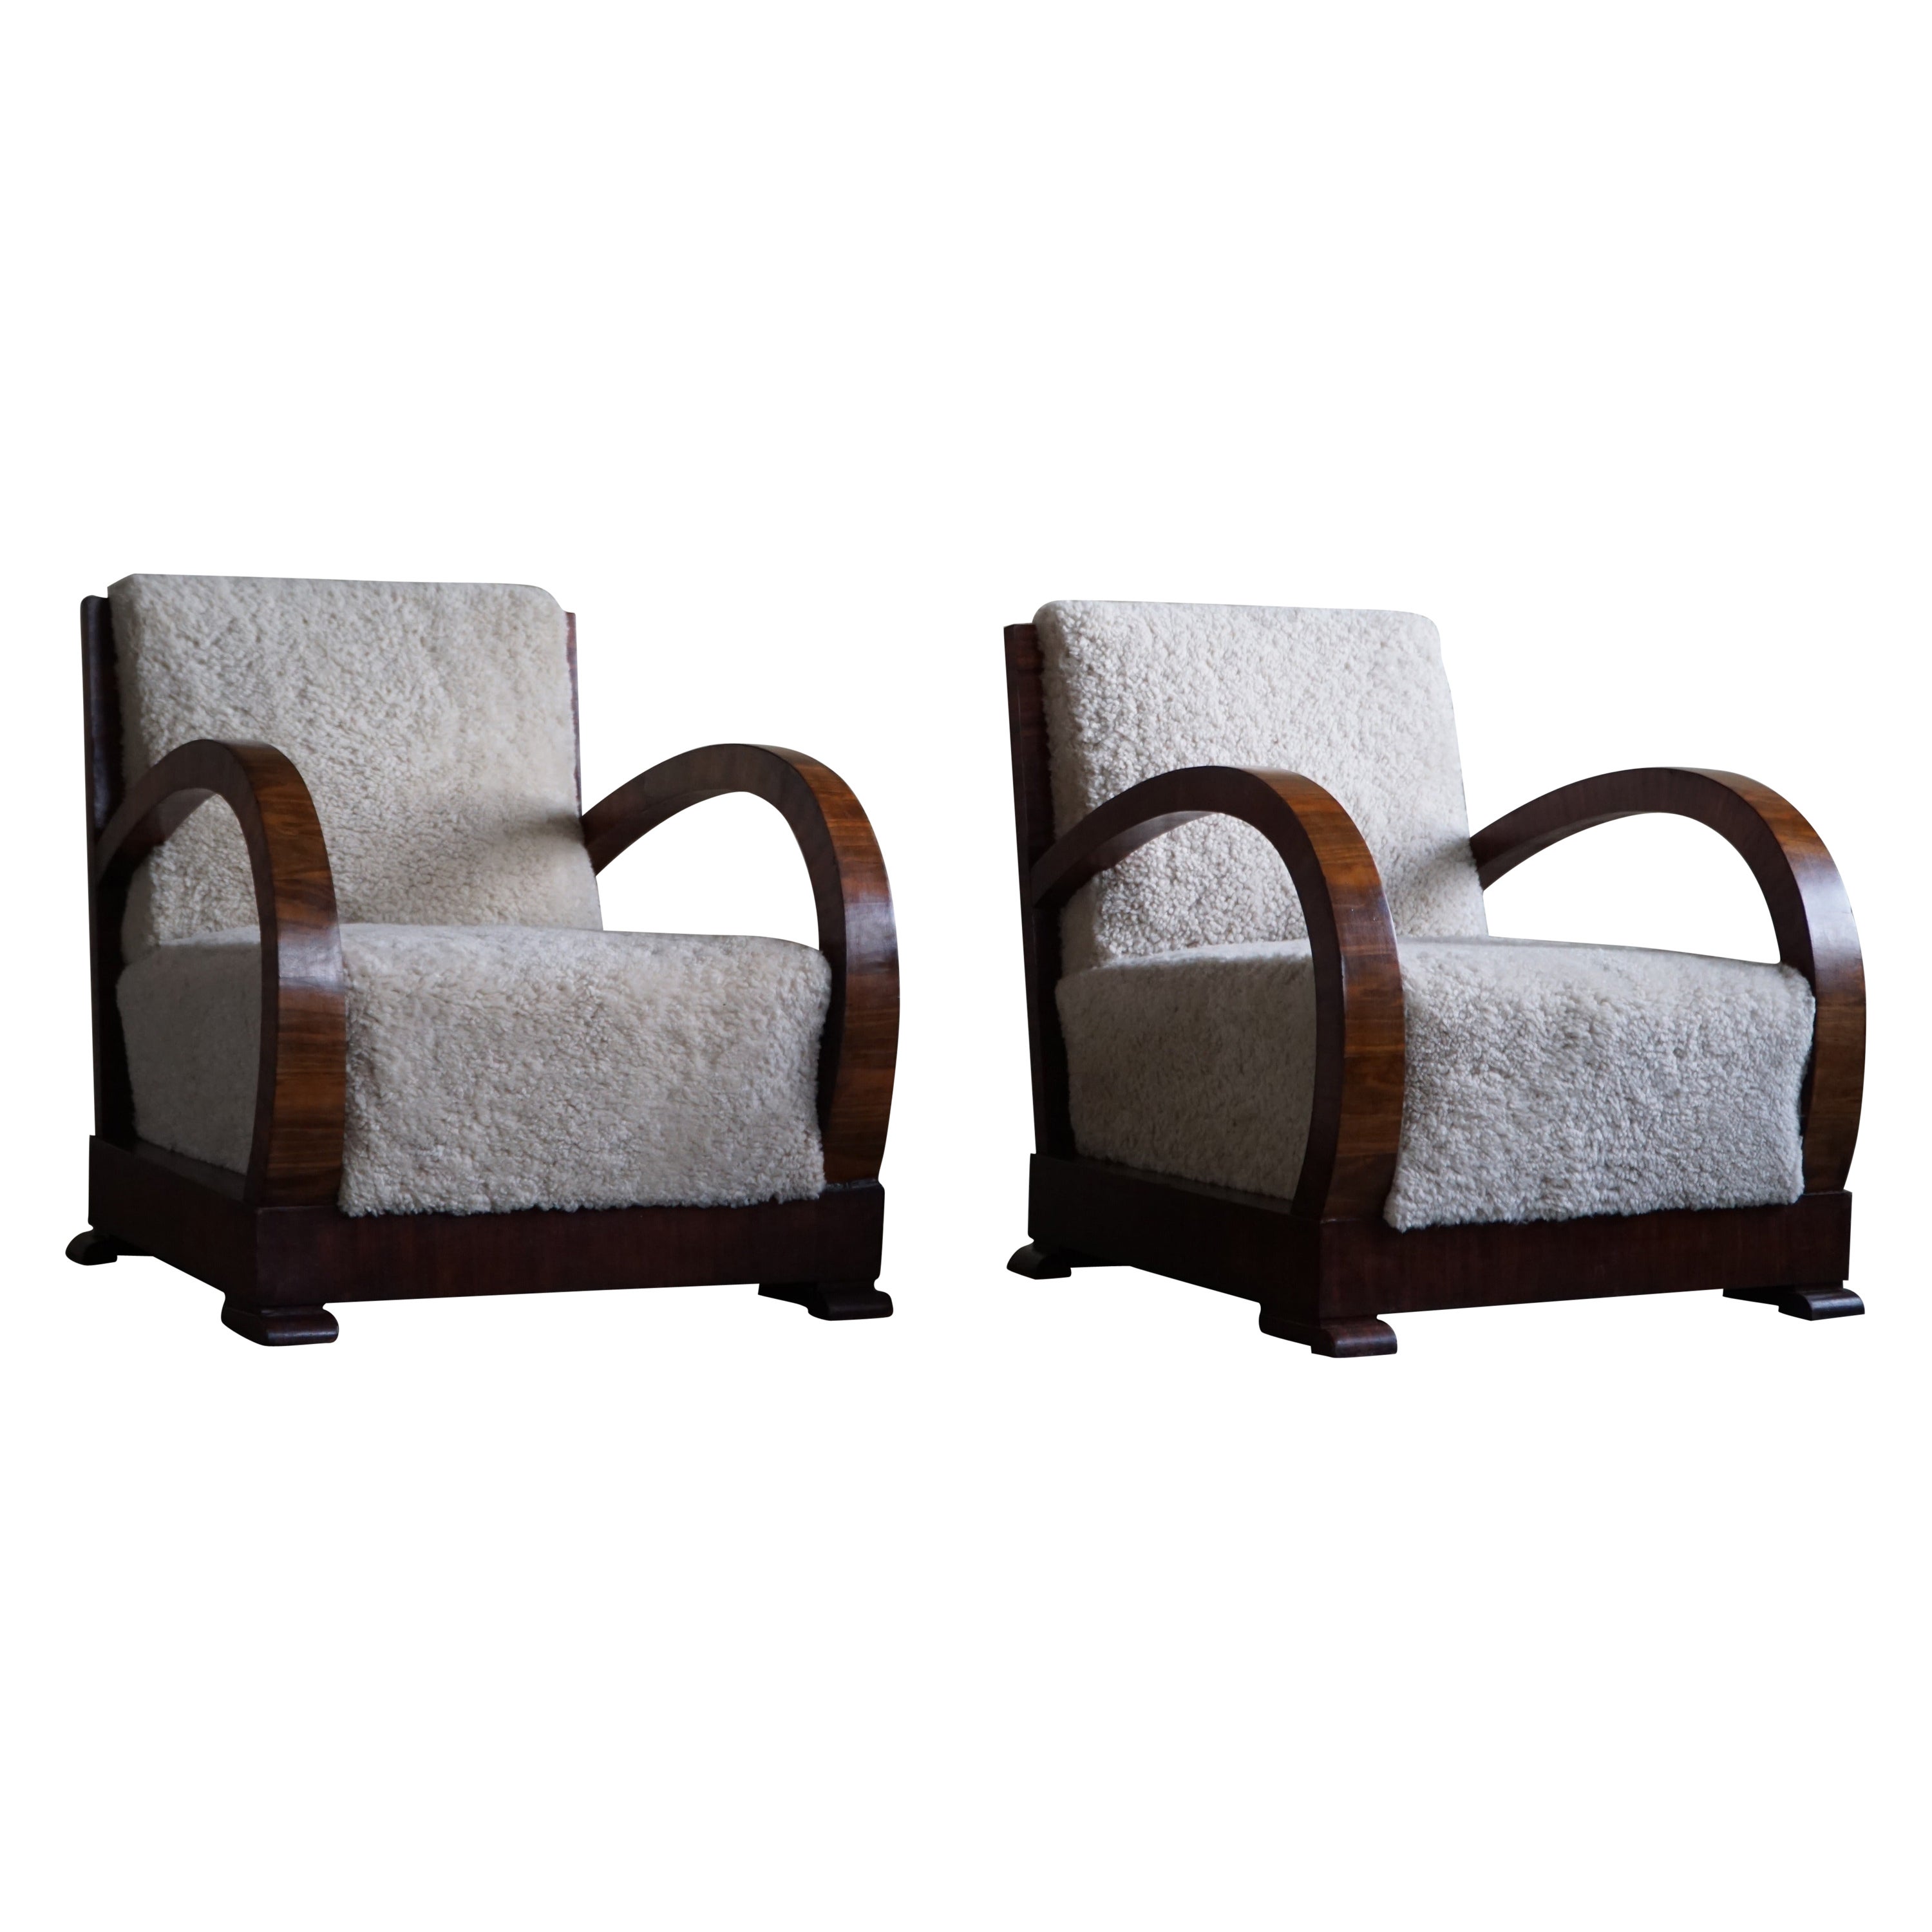 Pair of Danish Lounge Chairs, Reupholstered, Lambswool & Walnut, Art Deco, 1930s For Sale